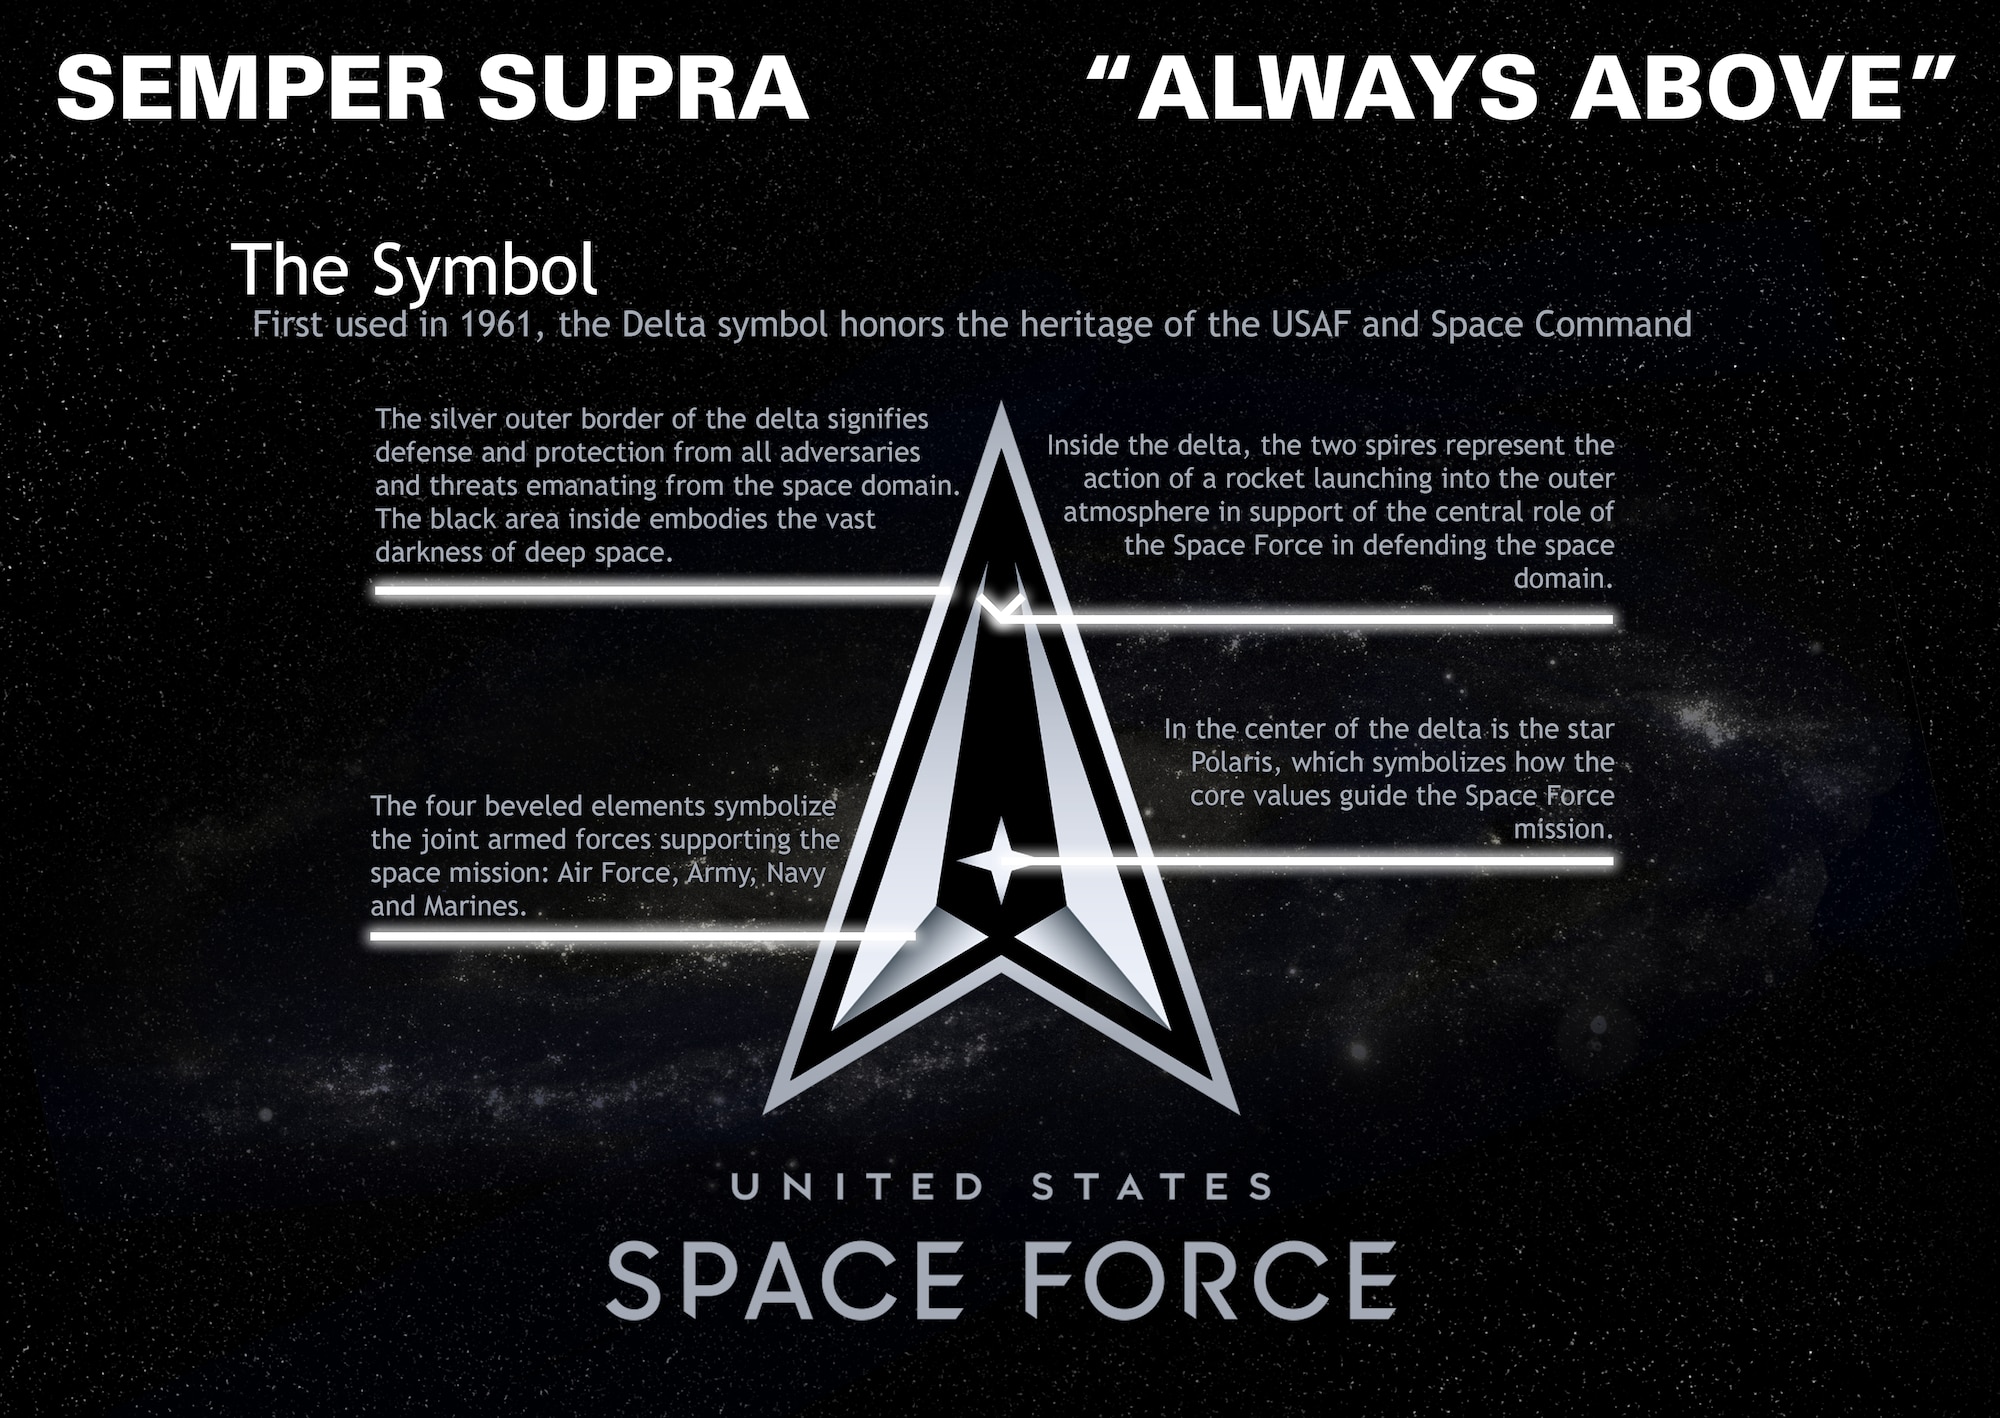 The U.S Space Force released its logo and motto, Semper Supra (Always Above), July 22, 2020 at the Pentagon, D.C. The logo and motto honor the heritage and history of the U.S. Space Force.